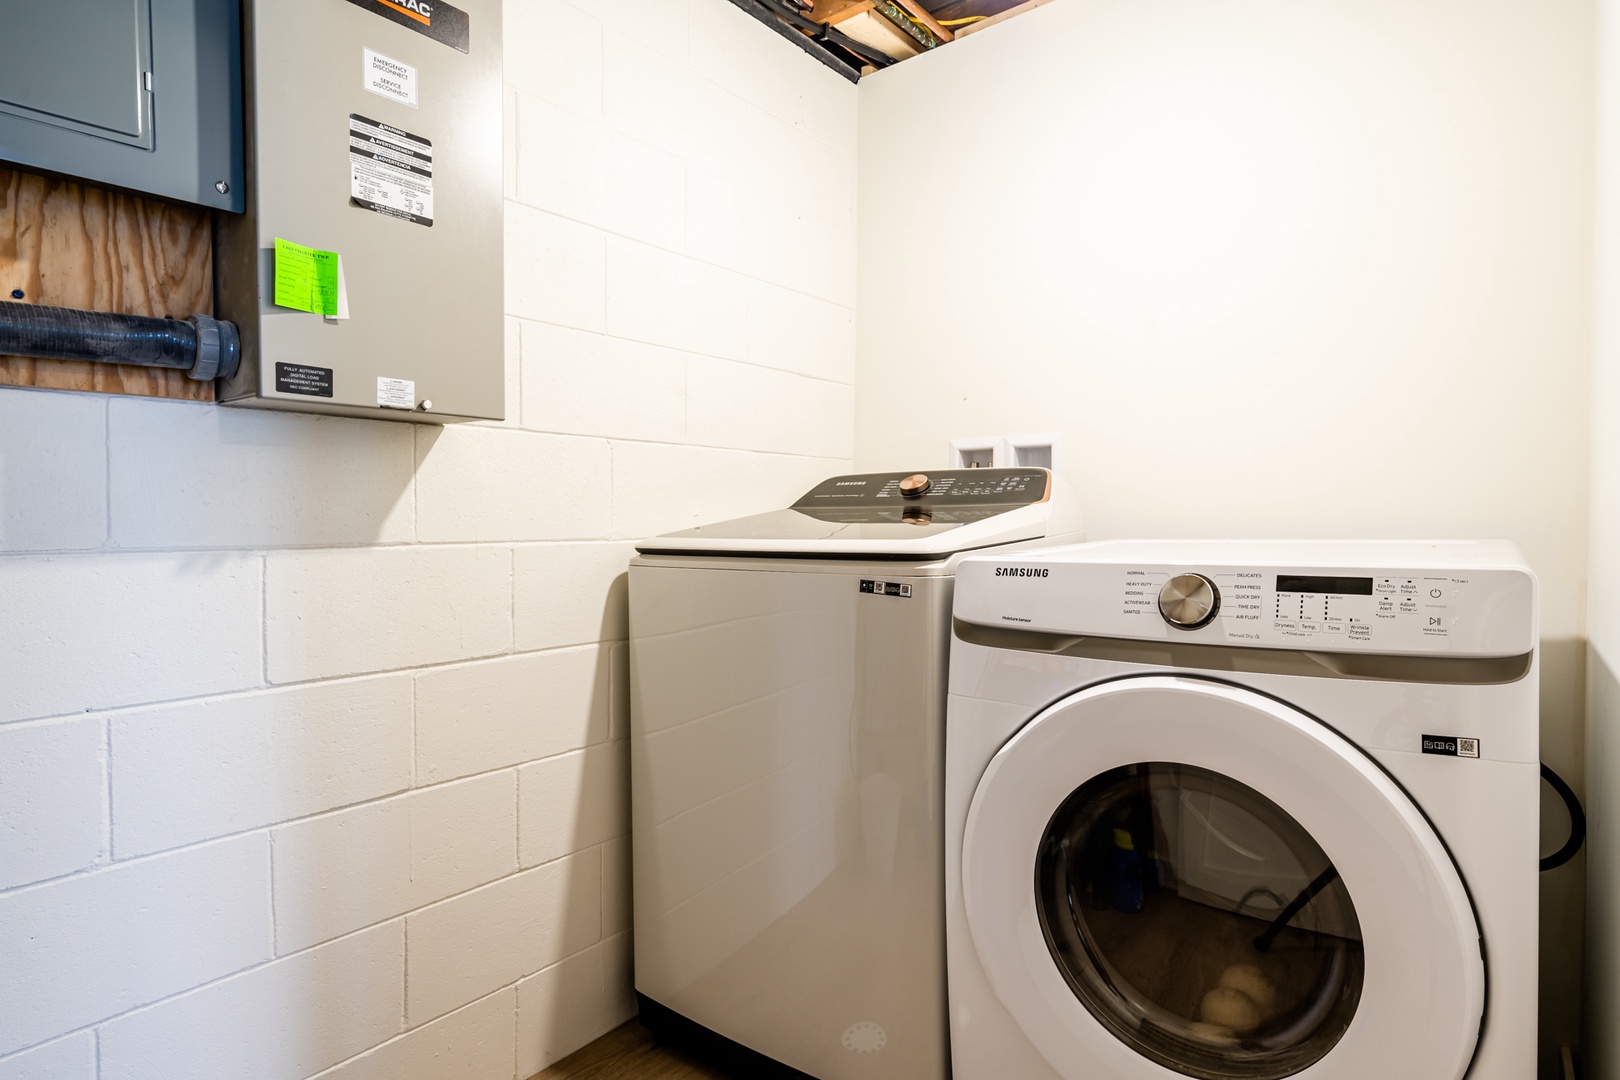 The laundry room has a high-quality washer and dryer, plus the essentials.